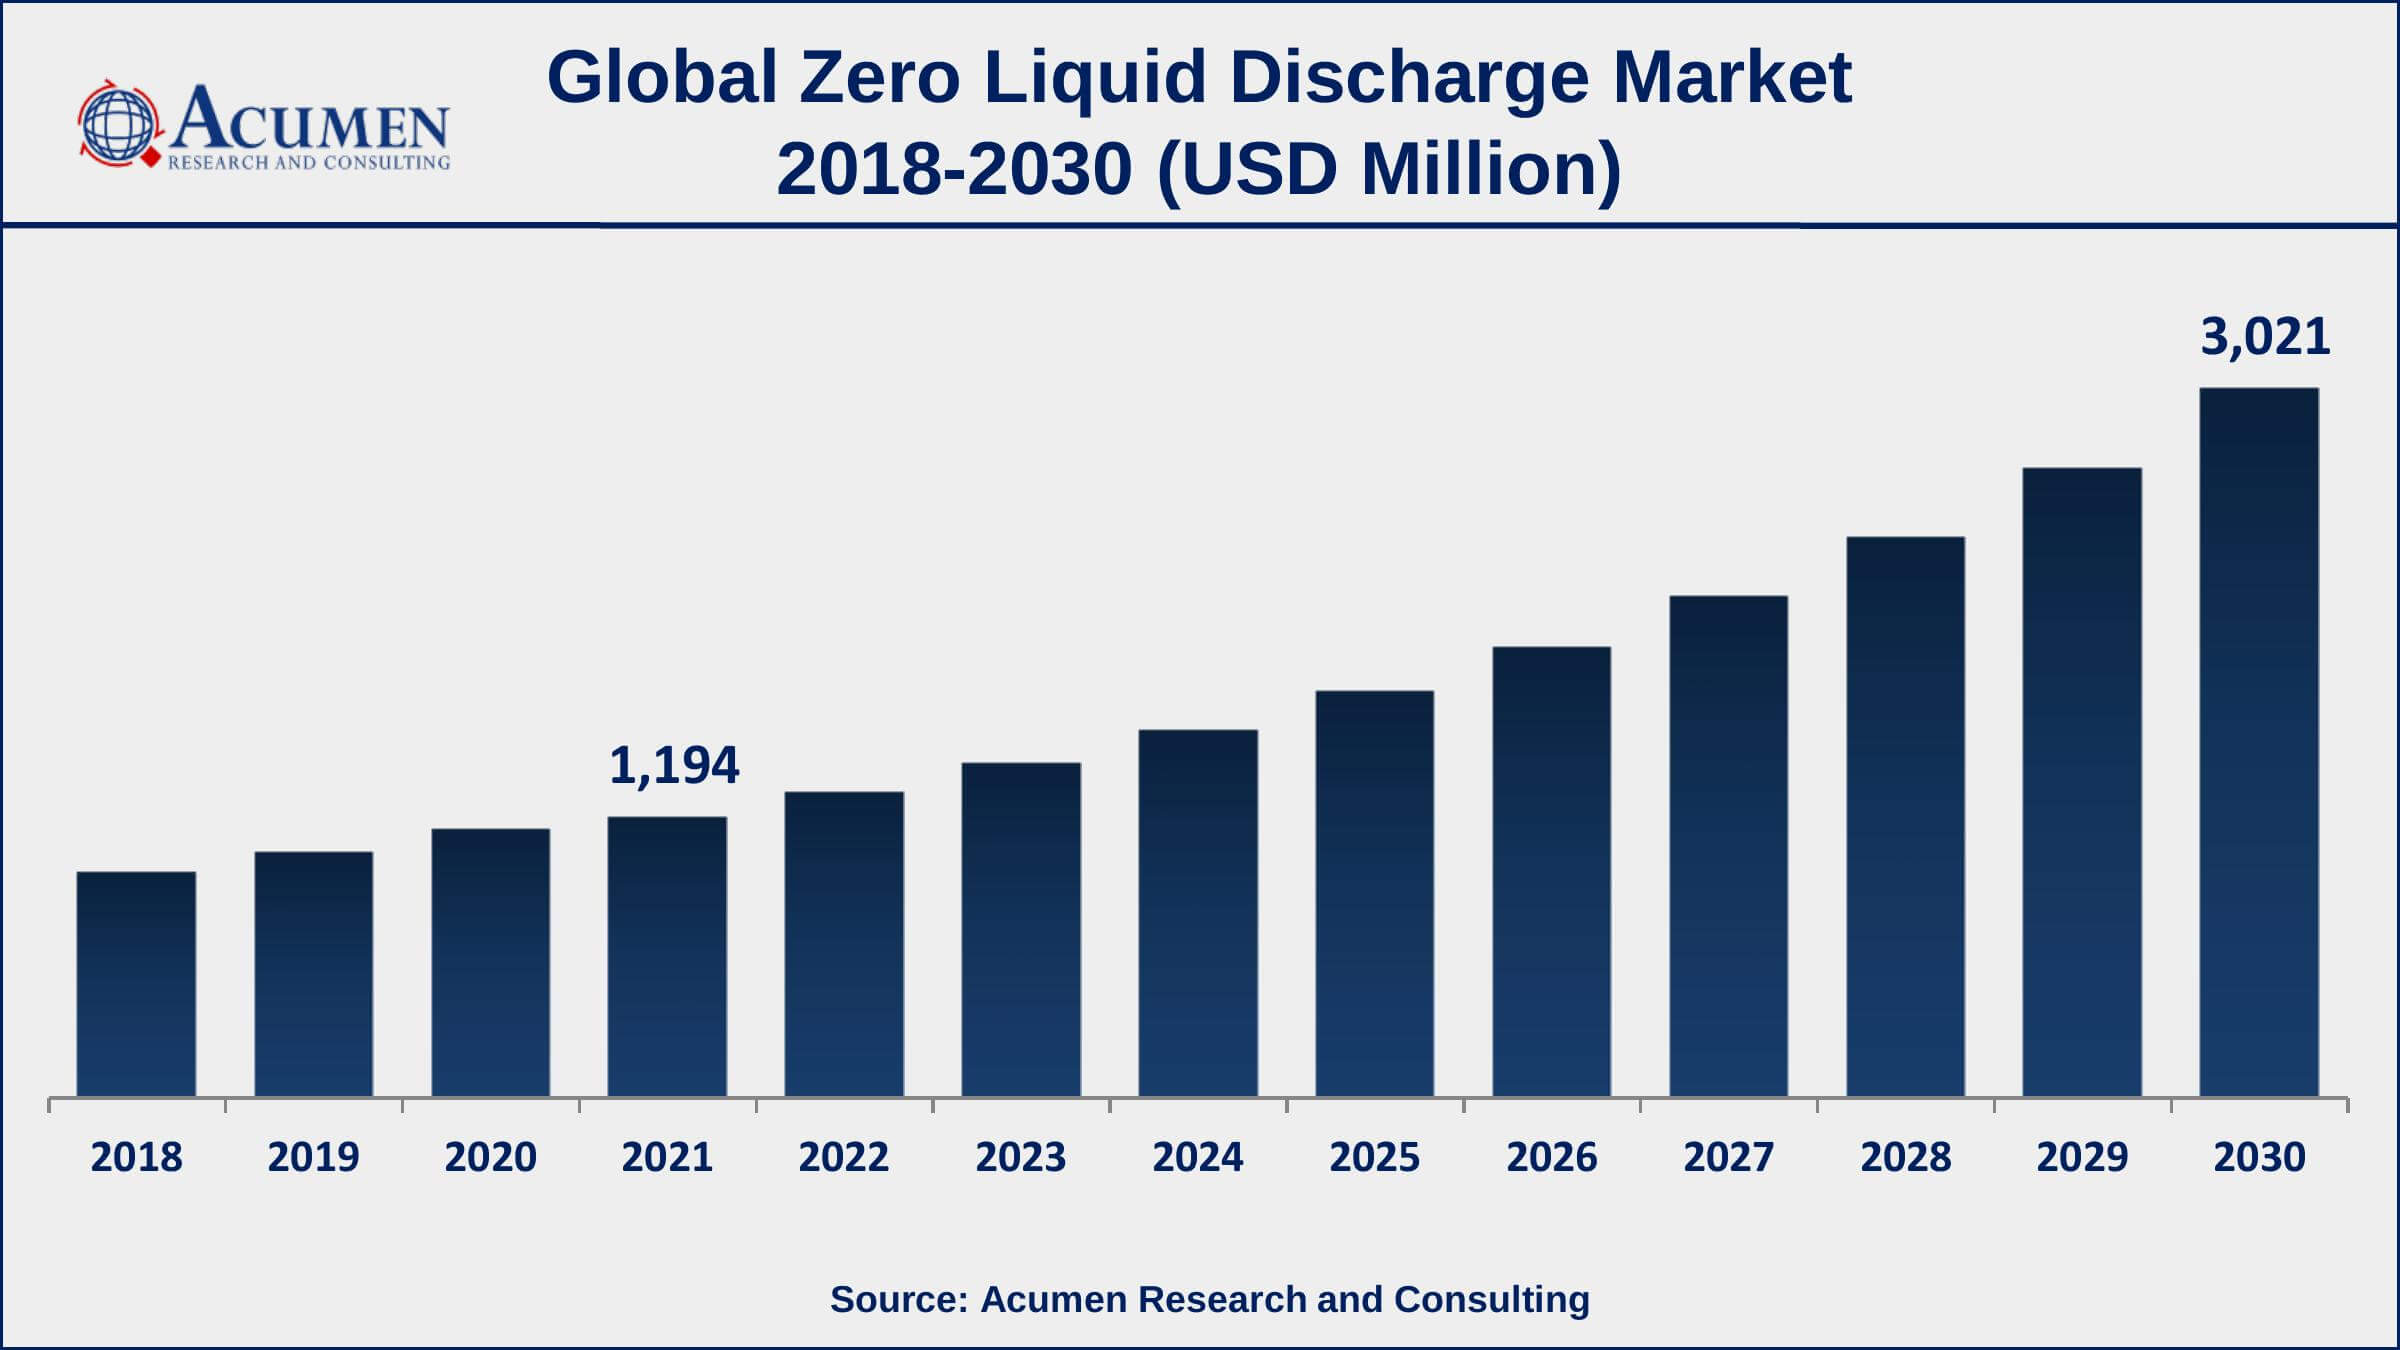 Asia-Pacific zero liquid discharge market growth will observe highest CAGR from 2022 to 2030